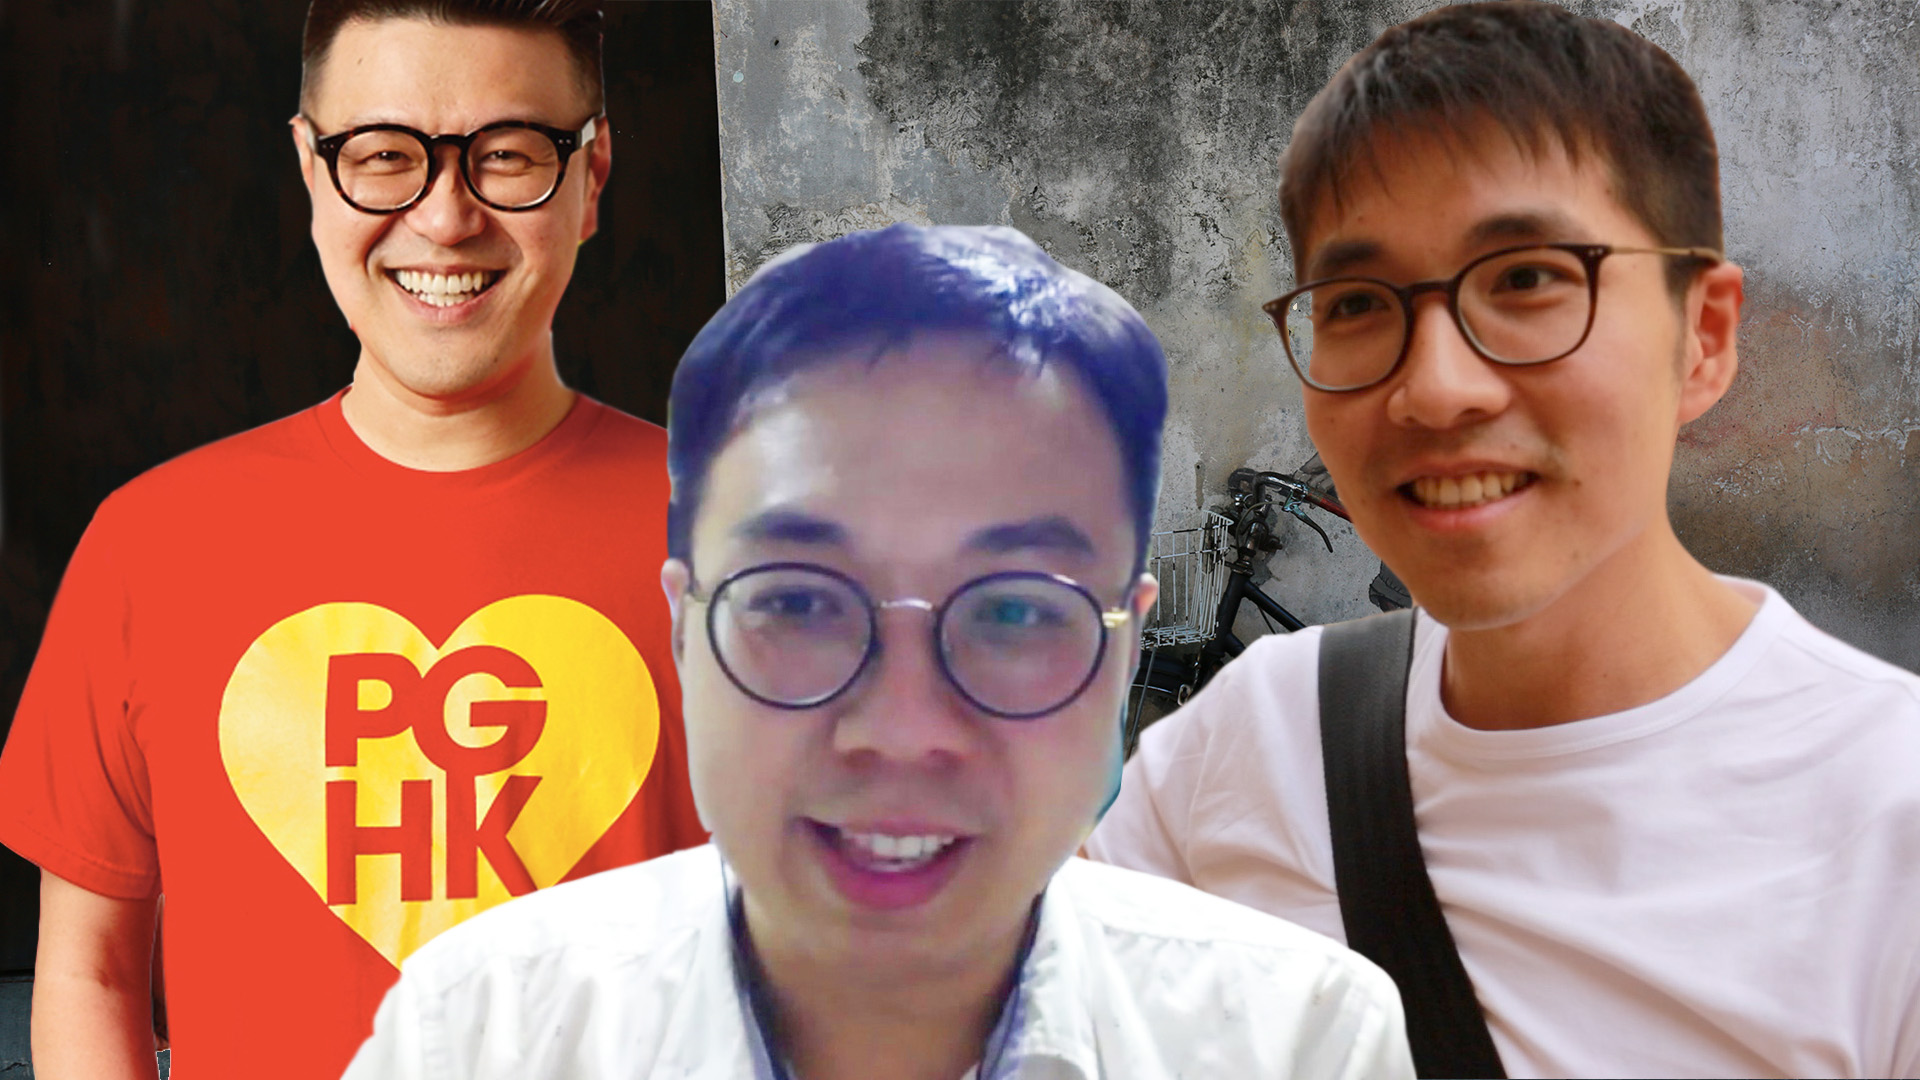 Is Hokkien a language or a dialect? What happened to lead to its demise? And what's being done to help slow the death of Penang Hokkien? Find out in this episode of Language Stories.